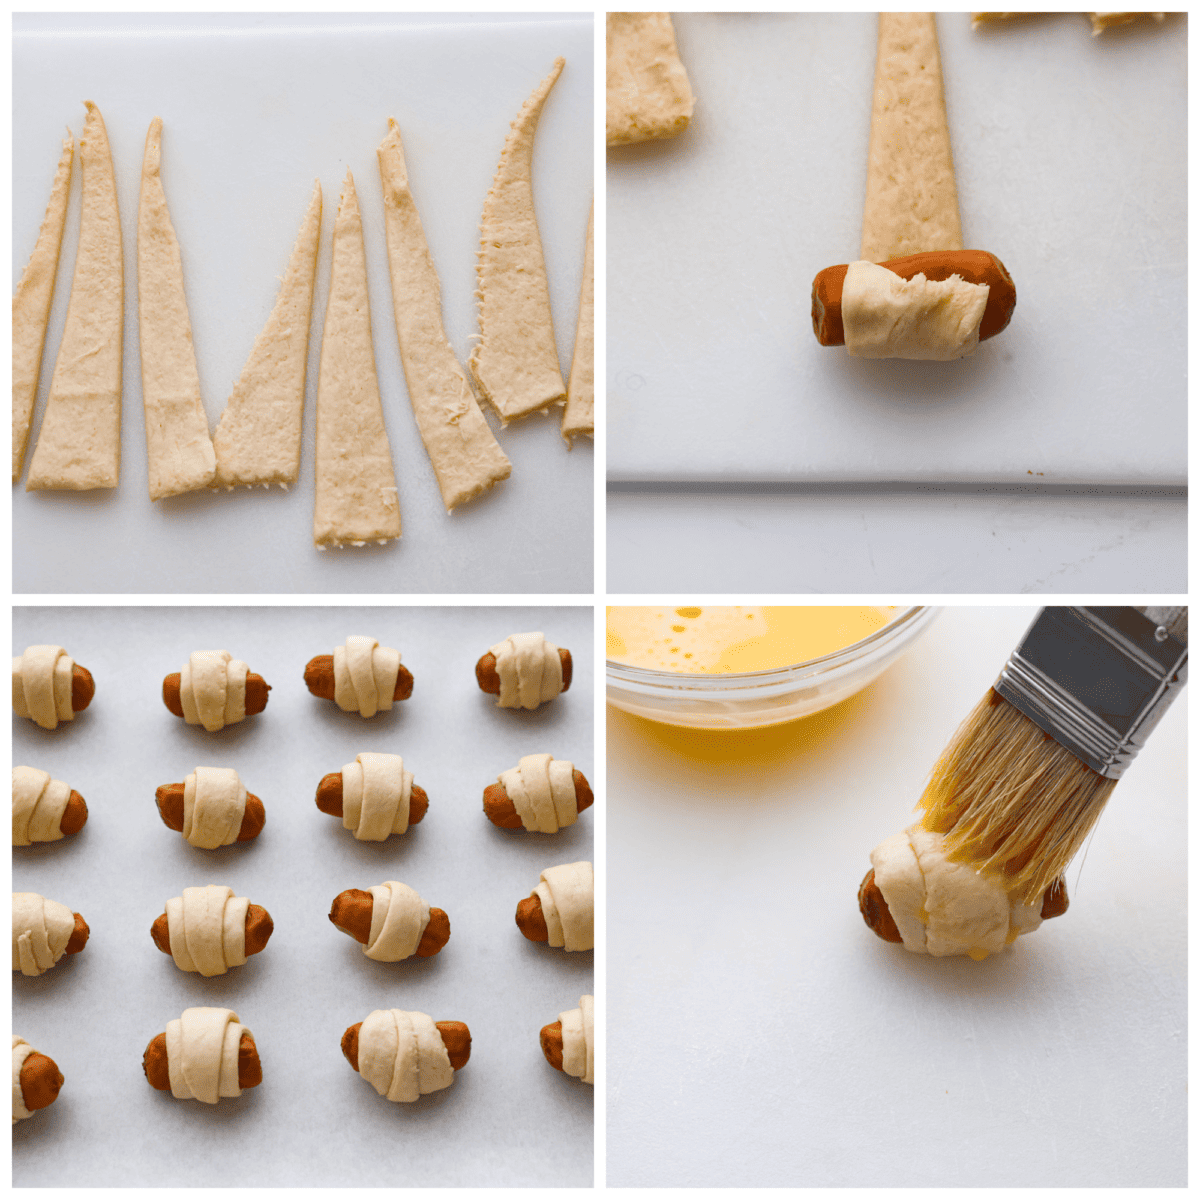 4-photo collage of hot dogs being wrapped in crescent roll dough, then brushed with butter.